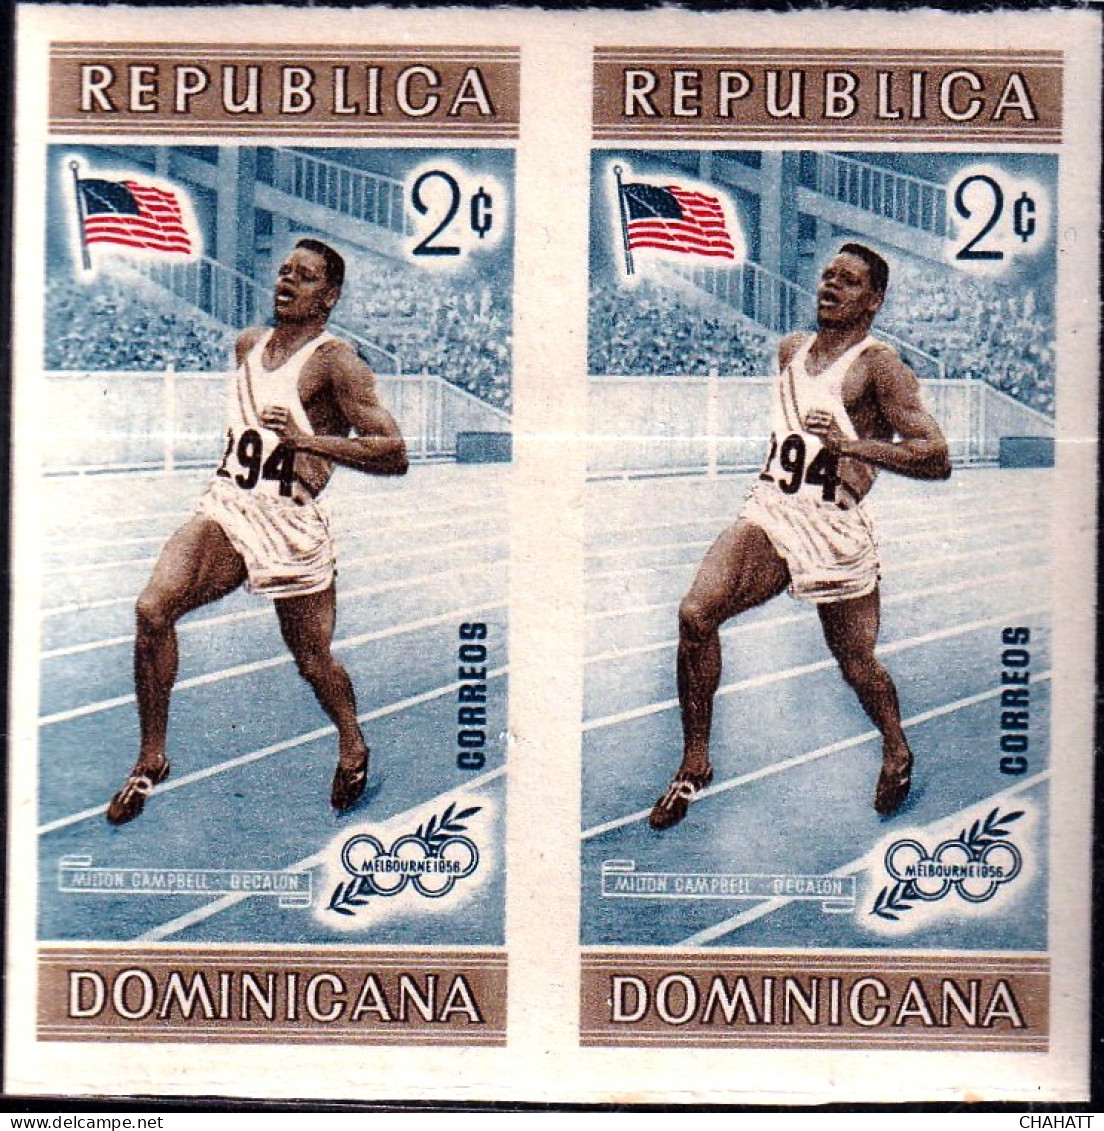 OLYMPICS-1956, MELBOURNE- DECALON (ATHLETICS) IMPERF PAIR-COLOR VARIETY- DOMINICANA-MNH- SCARCE- A5-745 - Estate 1956: Melbourne